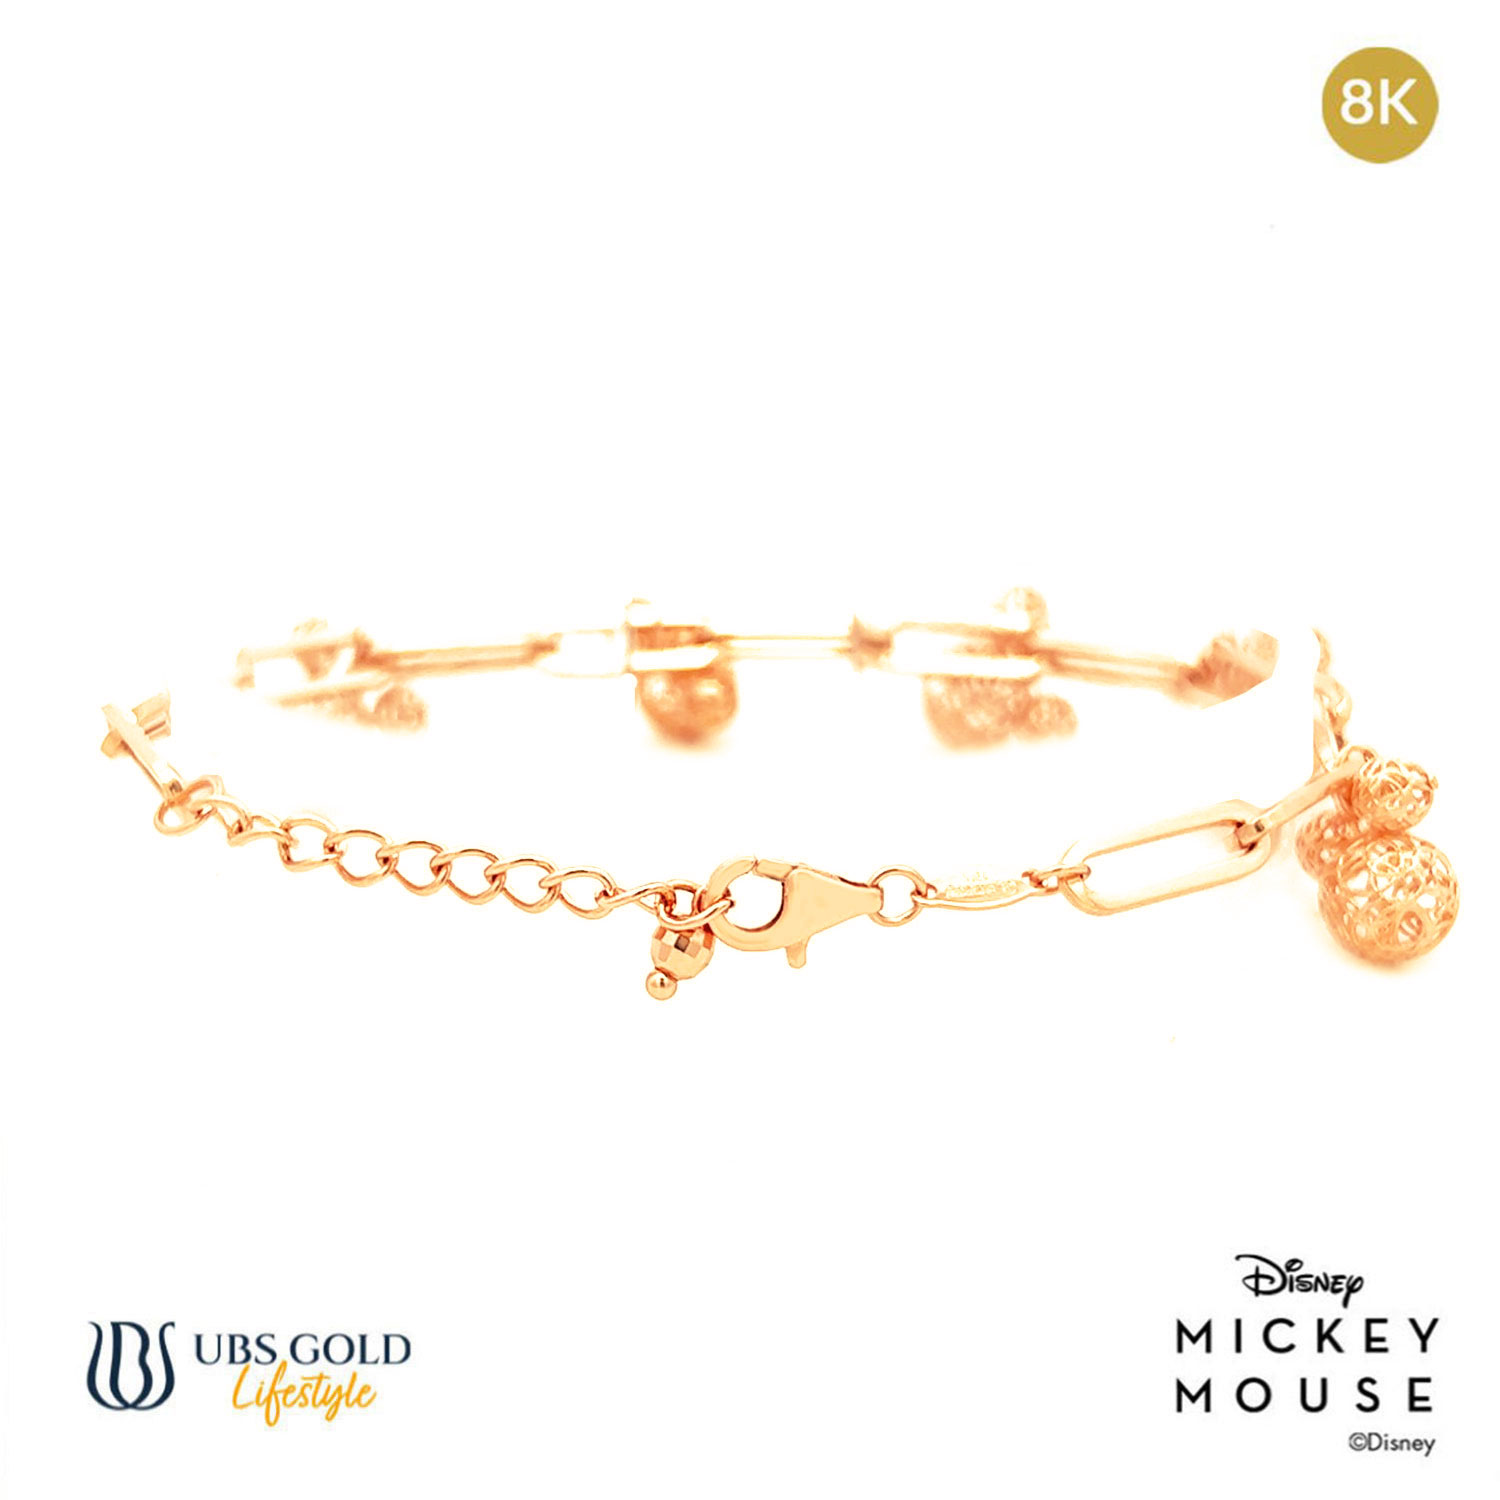 UBS Gold Gelang Emas Disney Mickey Mouse - Hgy0147K - 8K